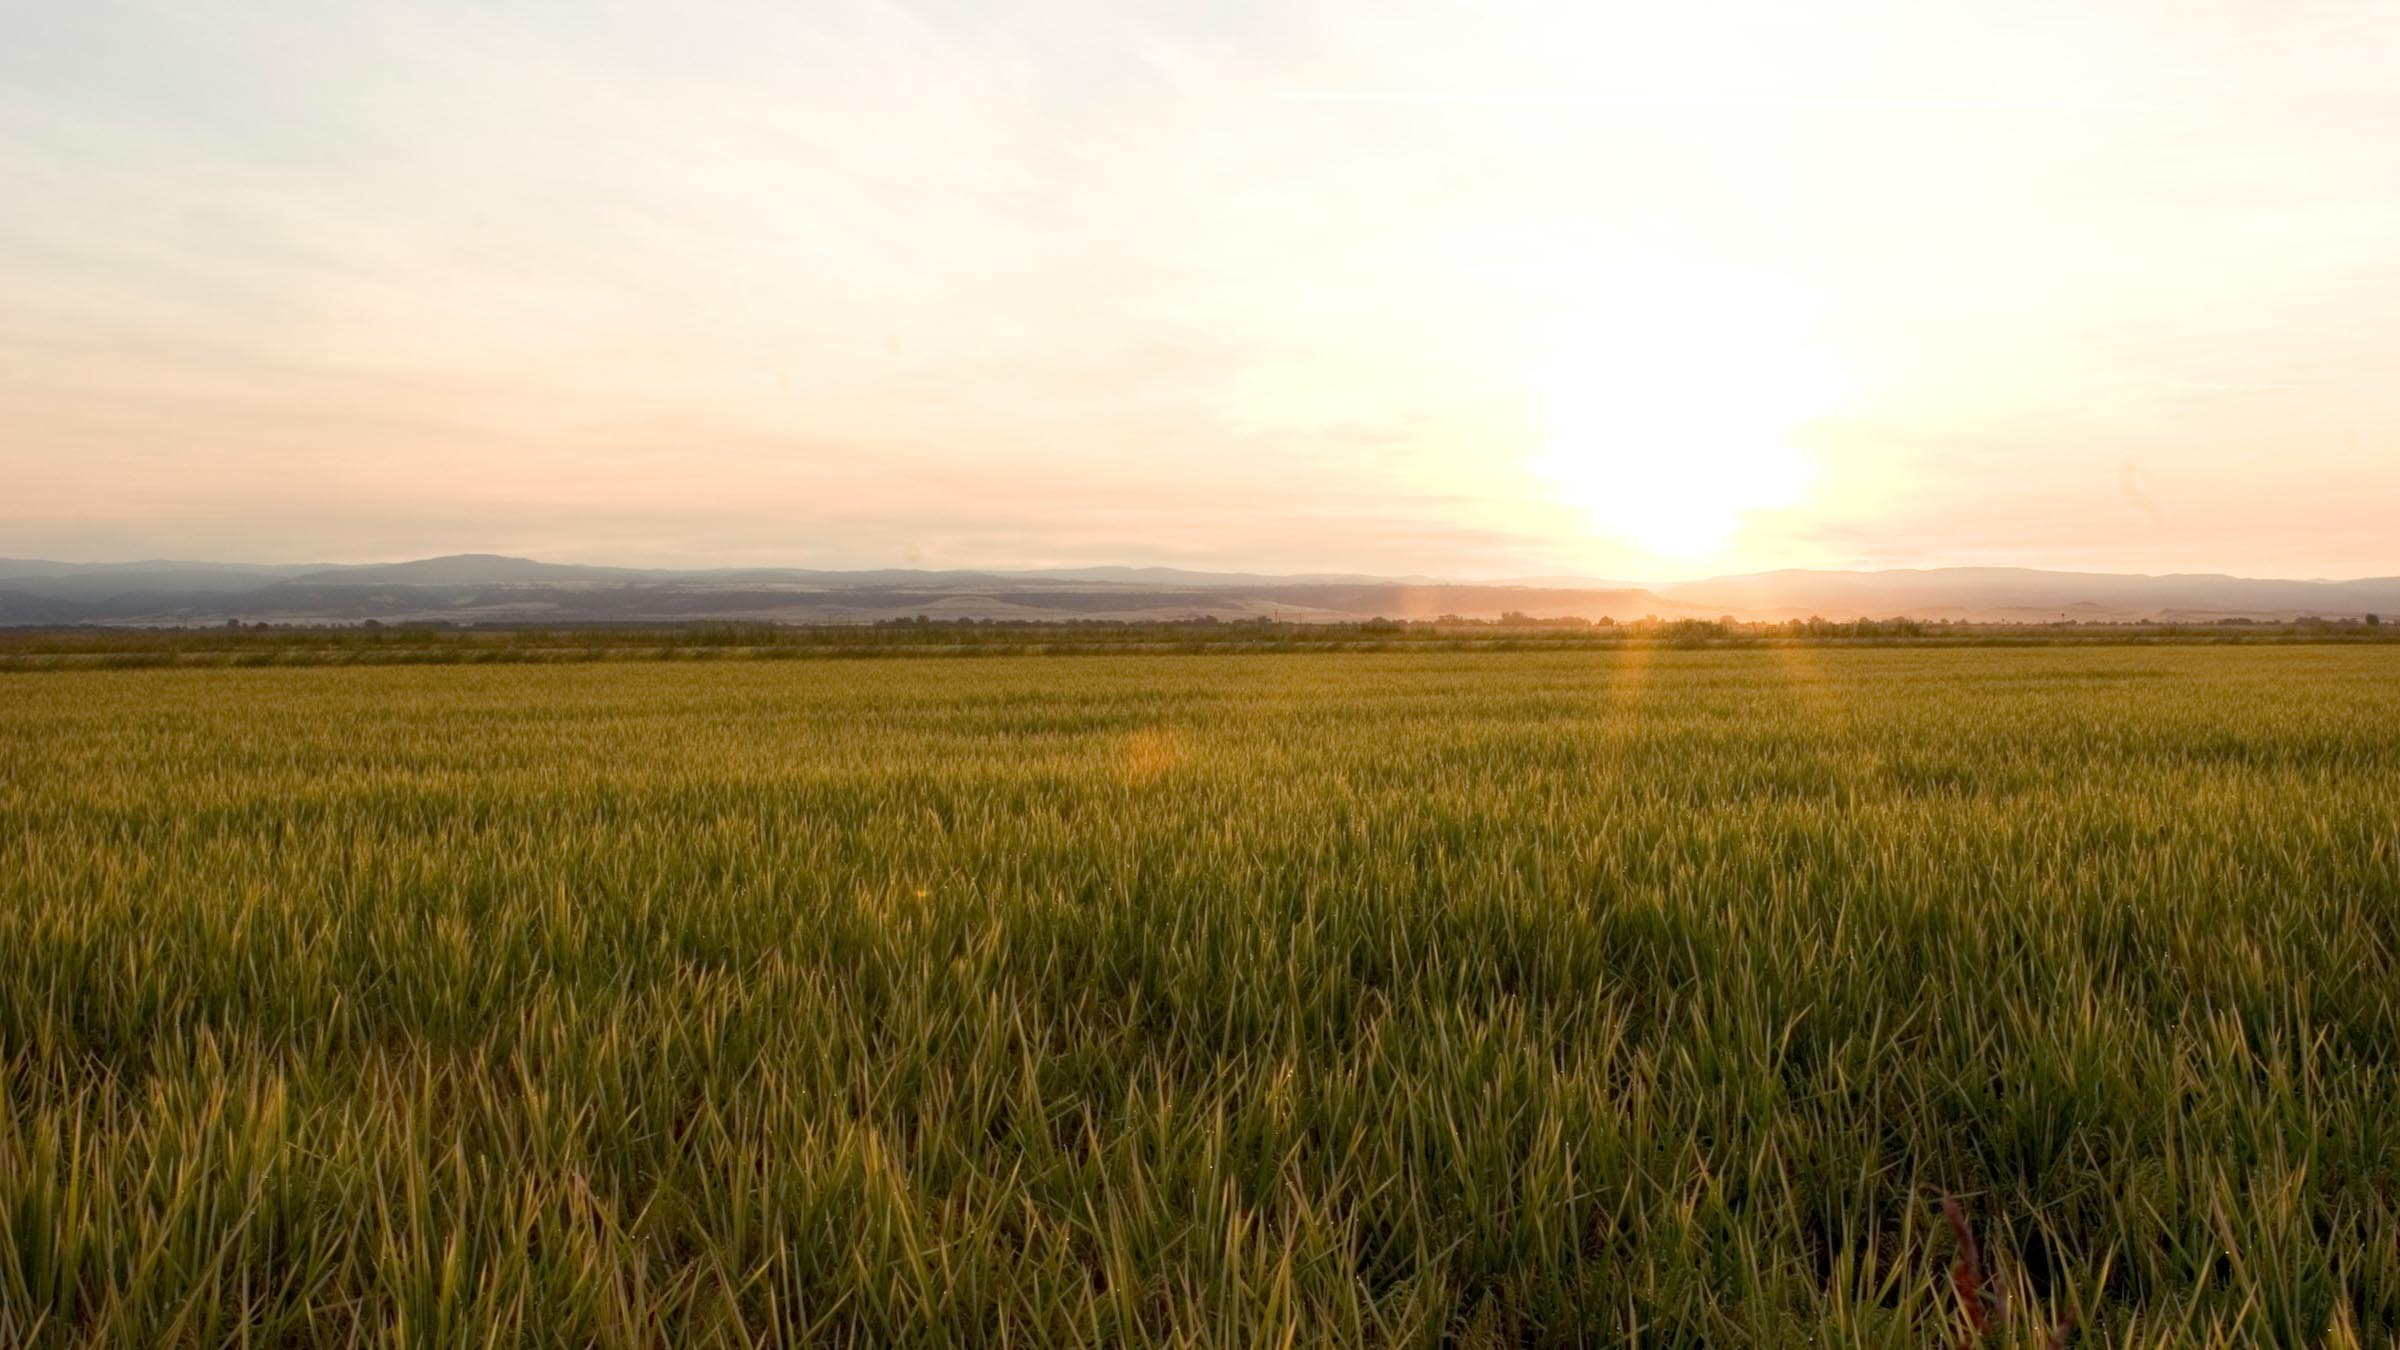 Green rice field at sunset